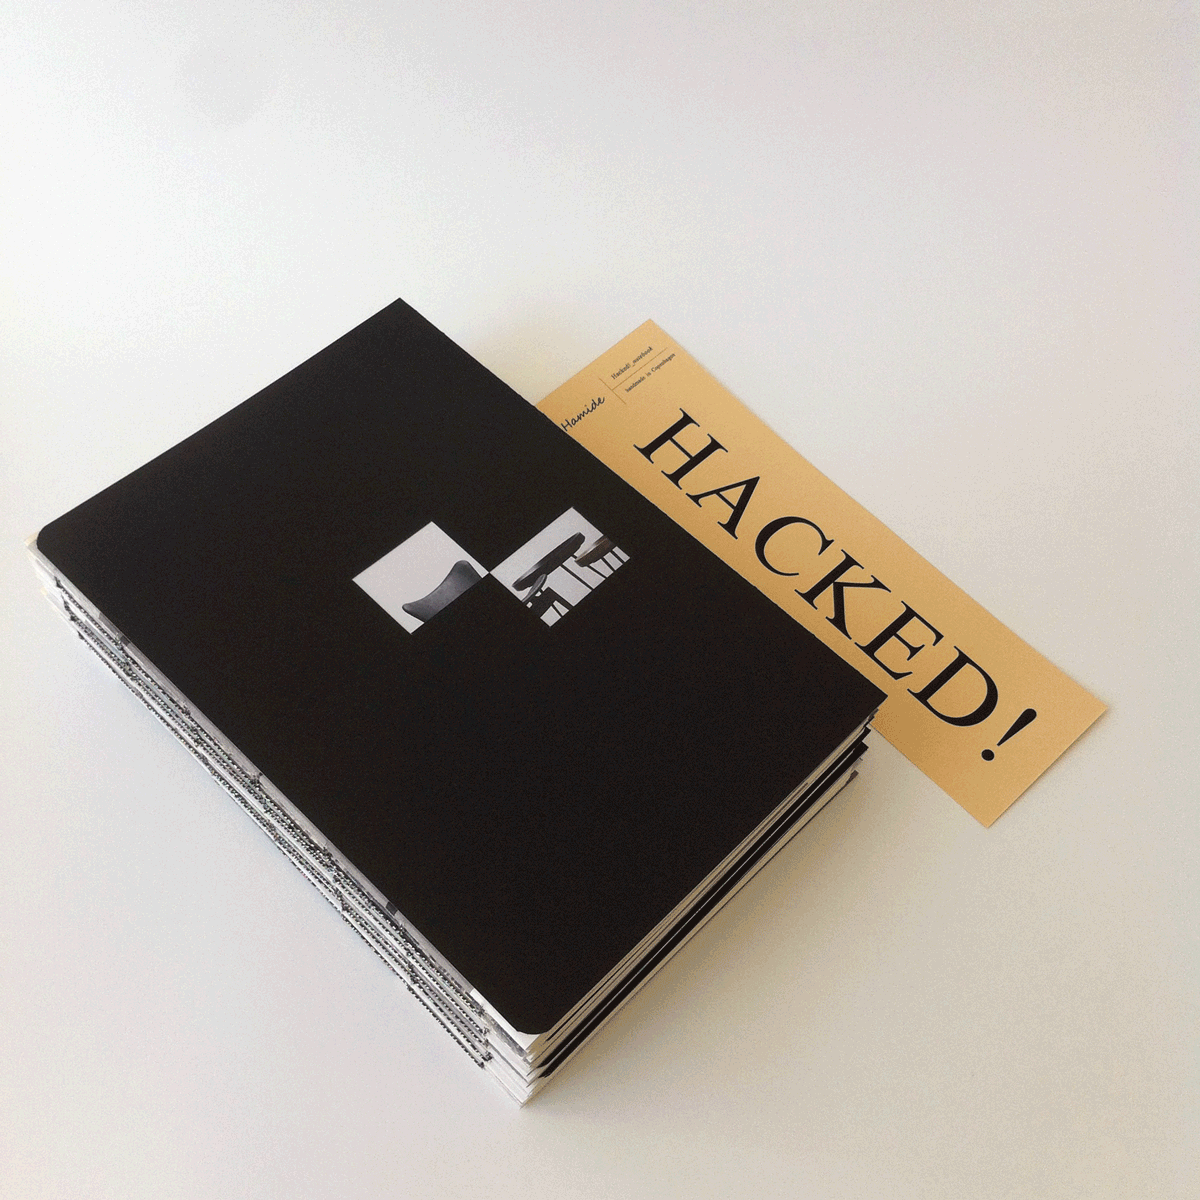 "Hacked!" notebooks designed for Mater Earth Gallery